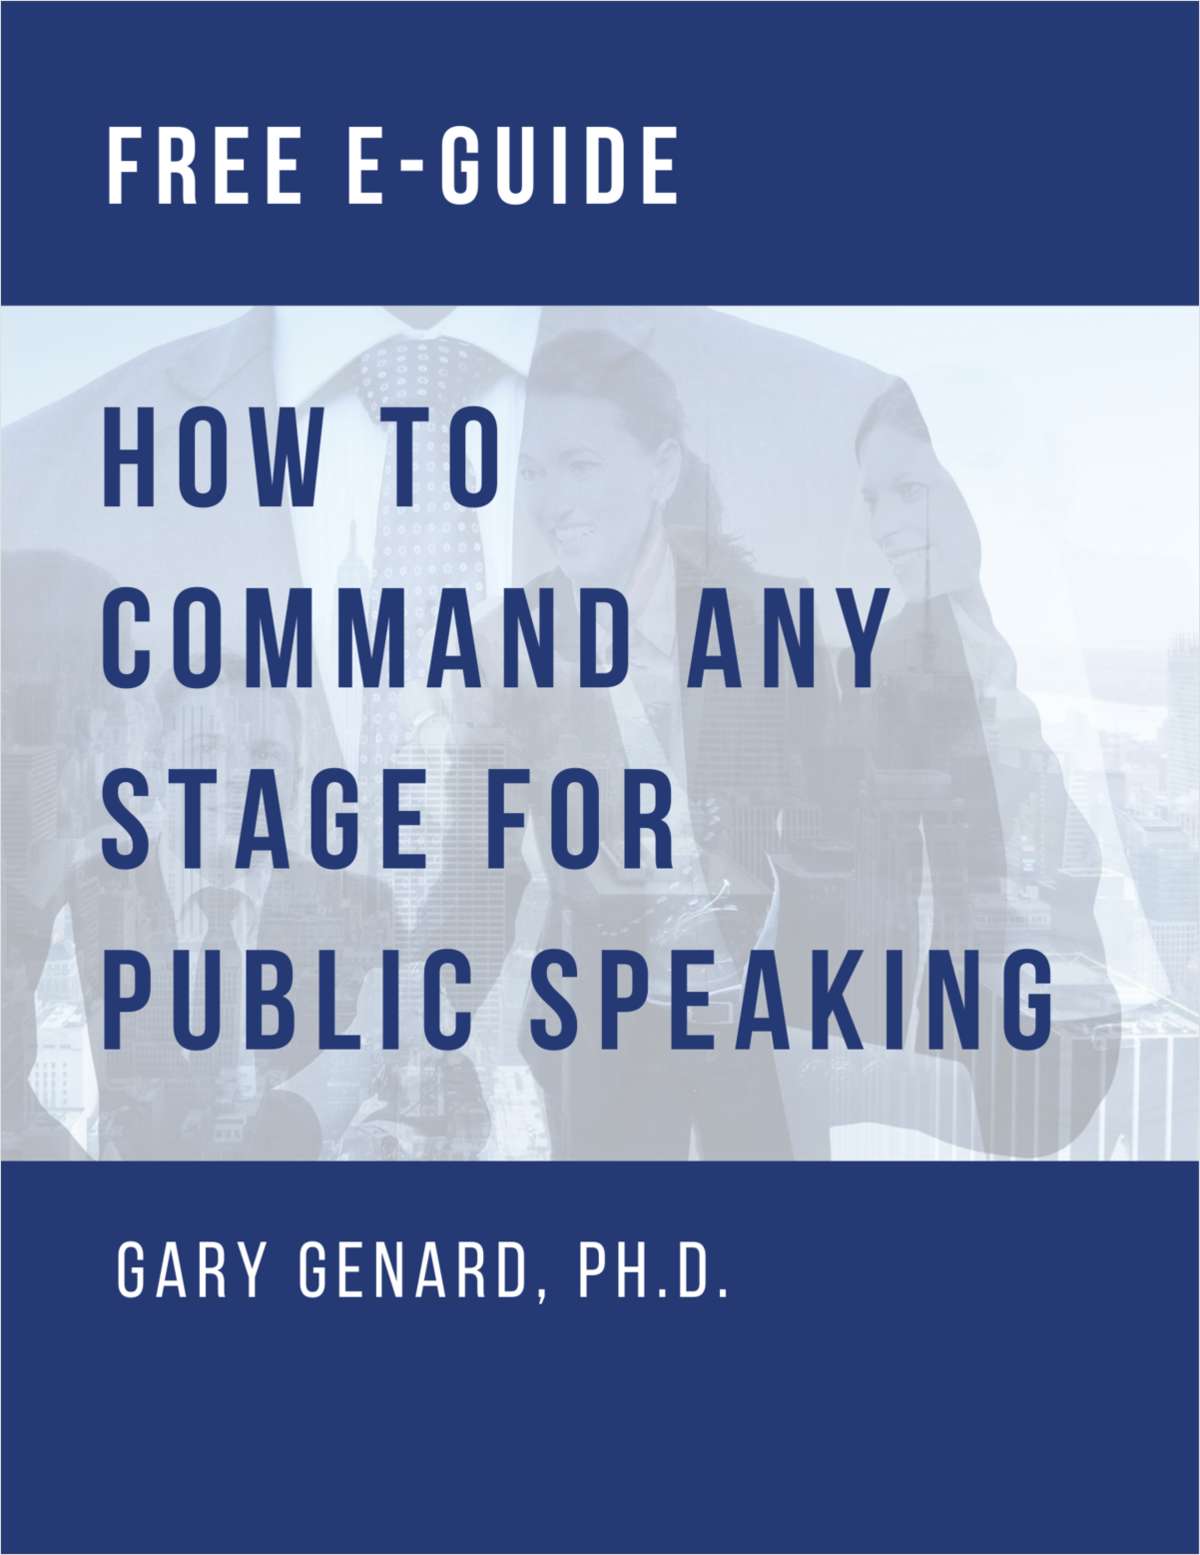 How to Command any Stage for Public Speaking